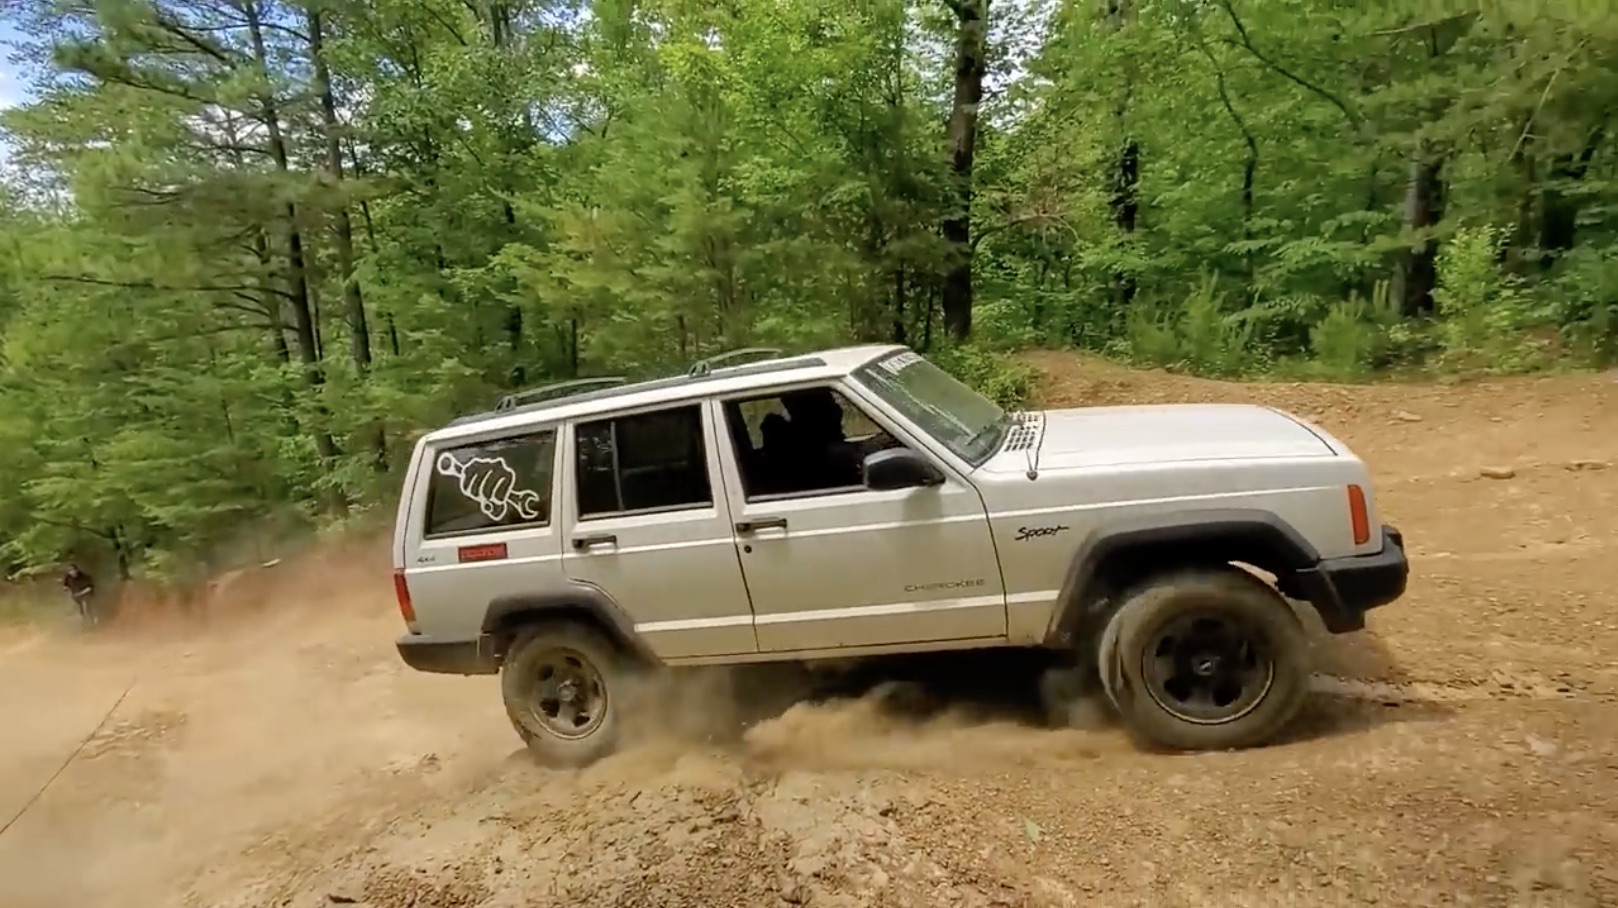 Cheap Jeep Challenge: Flogging Two Junkyard Cherokees For The Fun Of It!